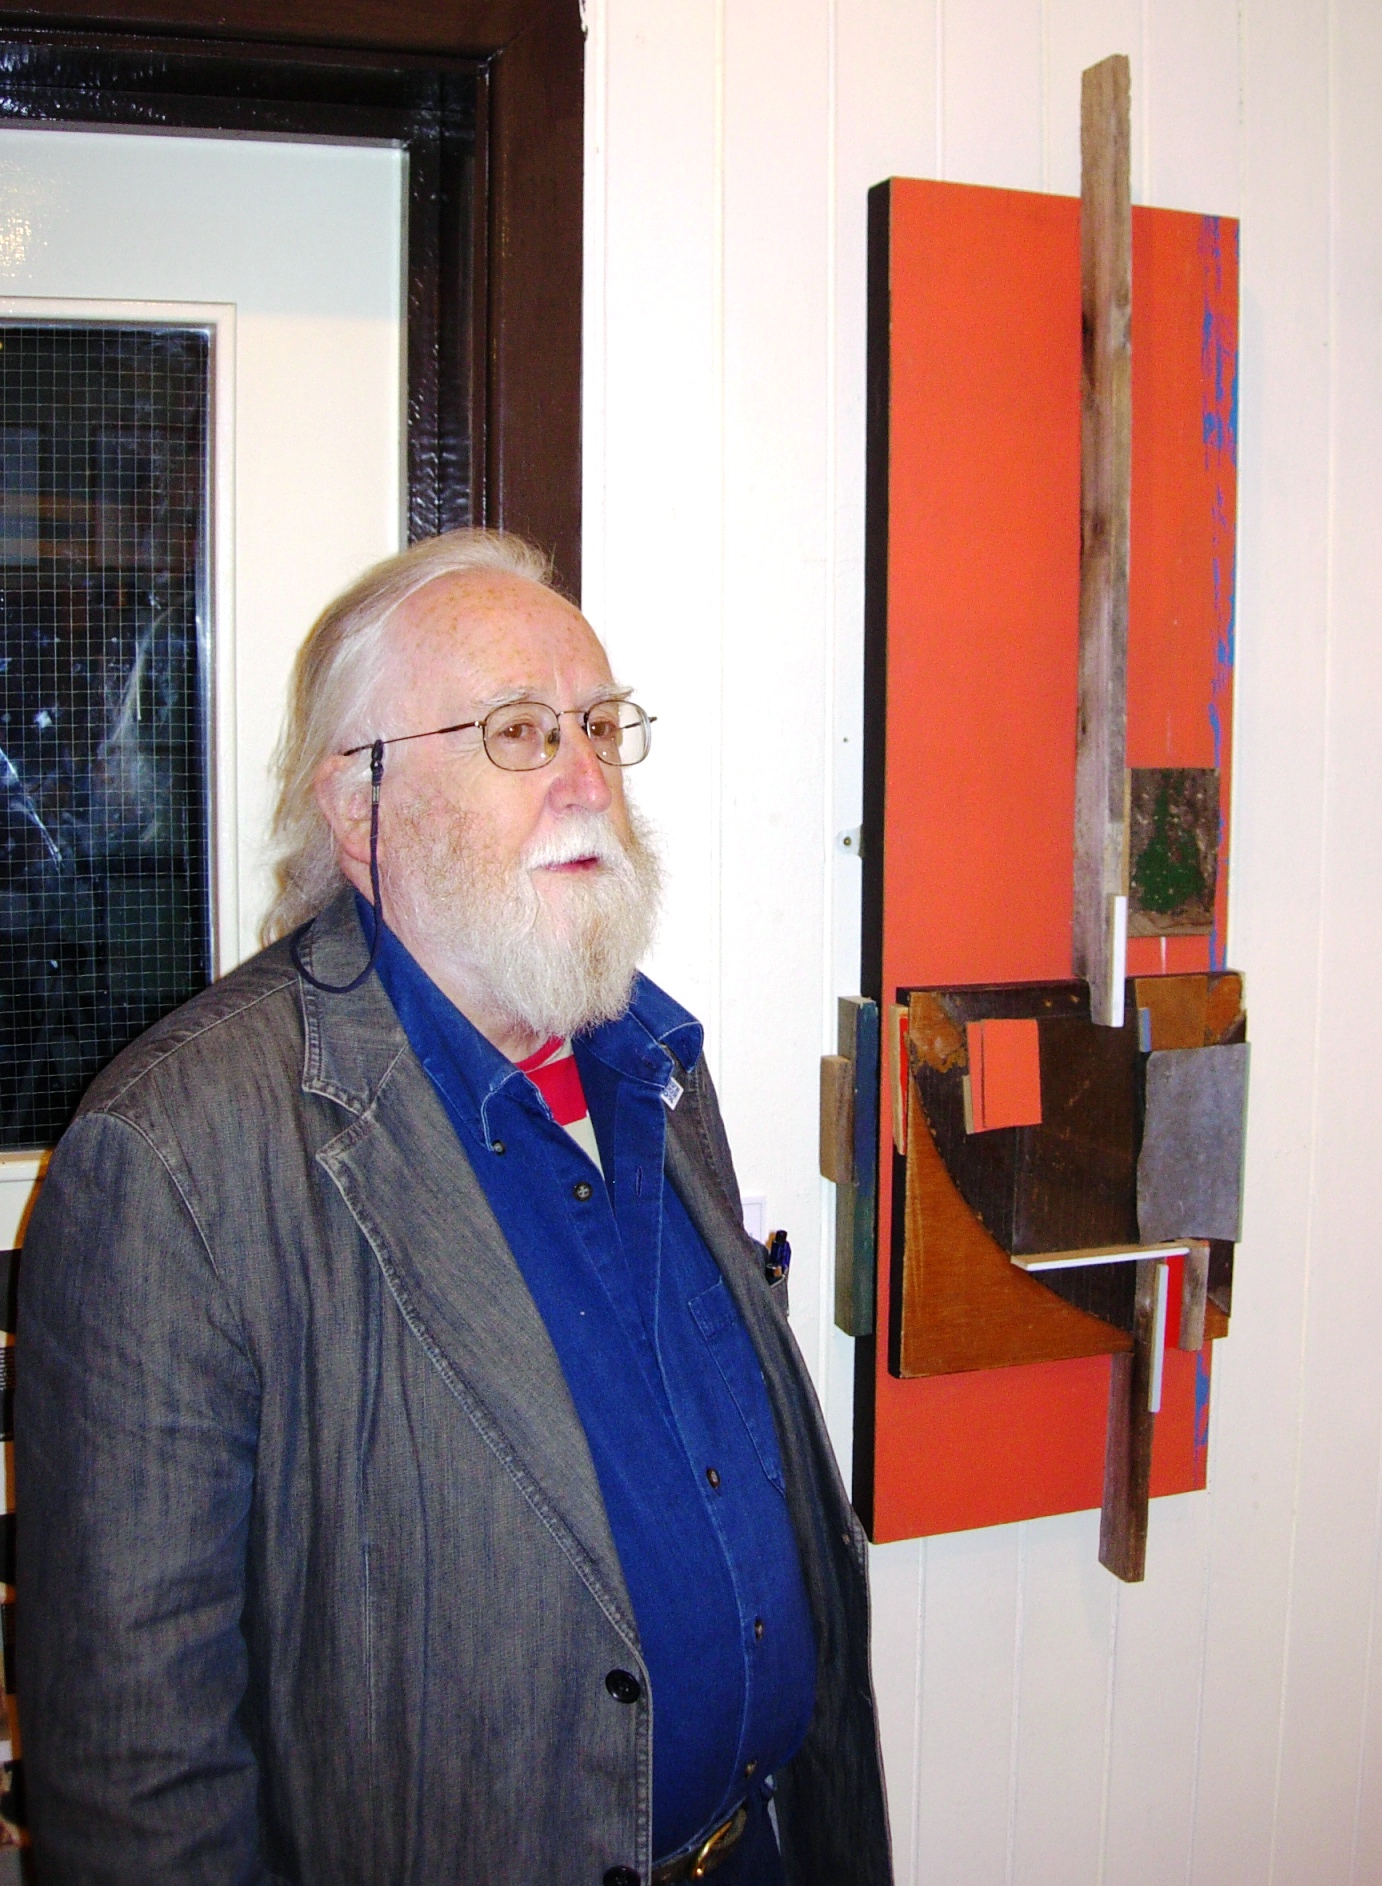 Islwyn Watkins with one of his assemblages, Trehafod, 27 September 2007